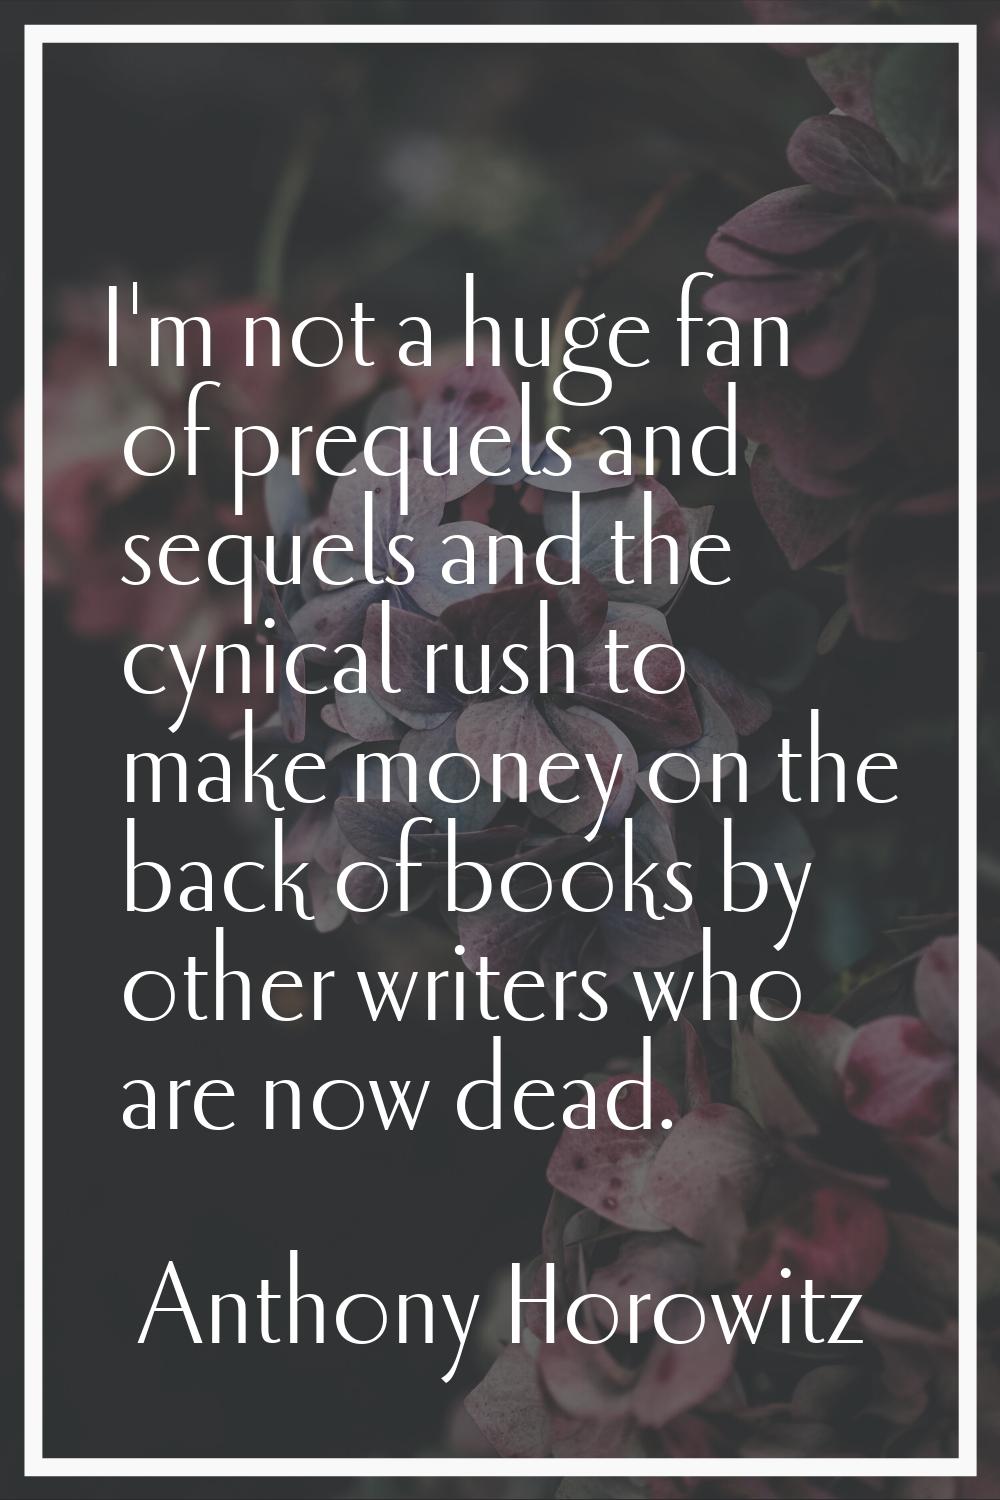 I'm not a huge fan of prequels and sequels and the cynical rush to make money on the back of books 